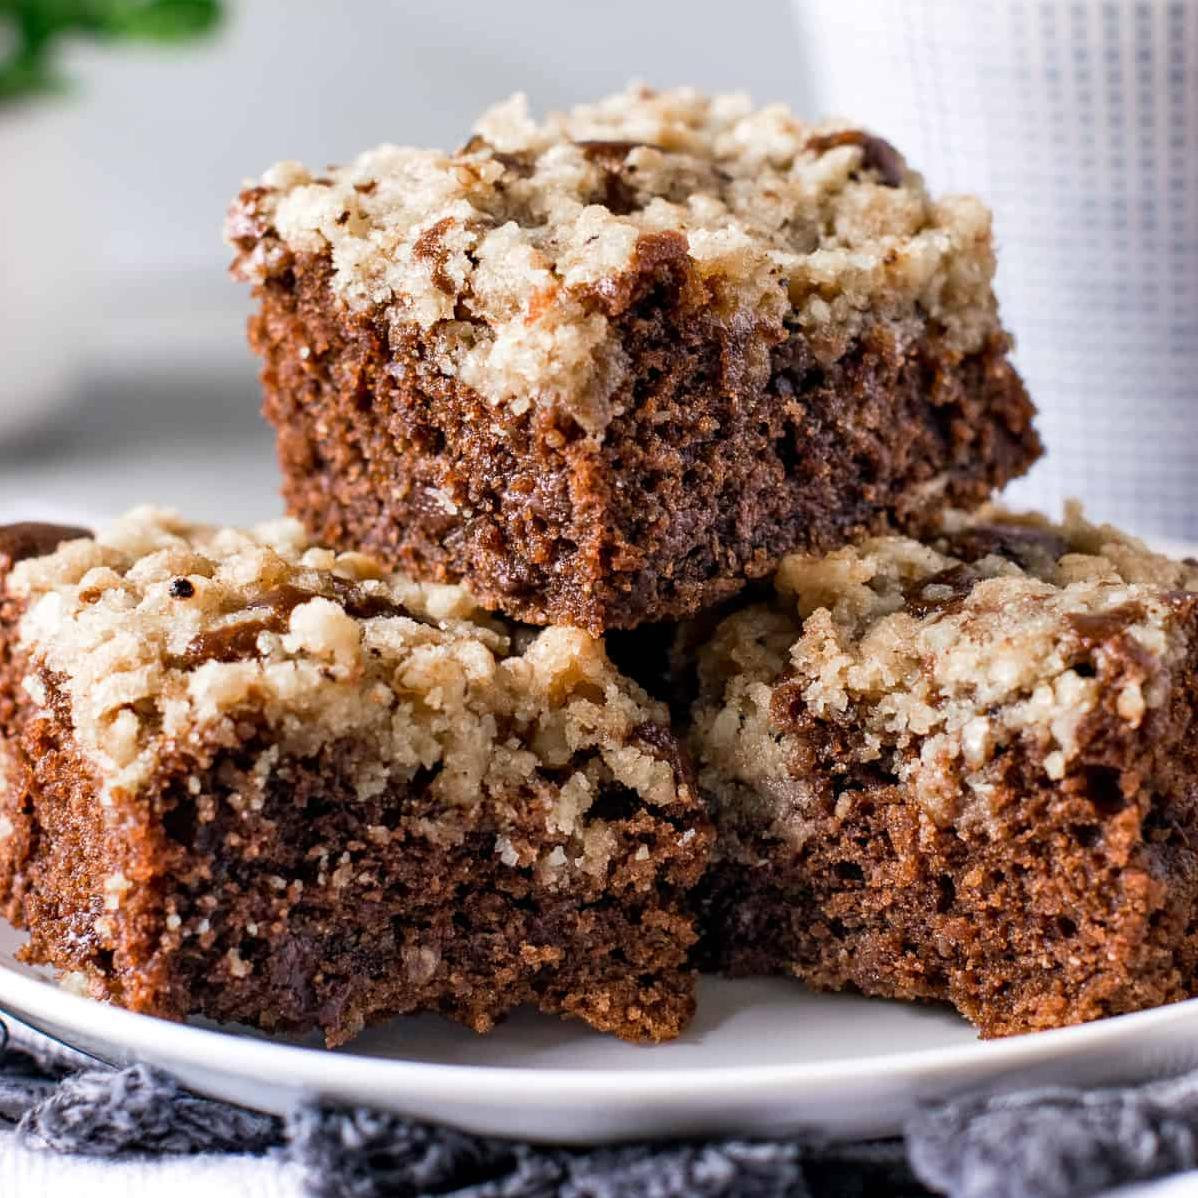  Satisfy your sweet tooth cravings with a slice of this heavenly cinnamon chocolate apricot coffee cake